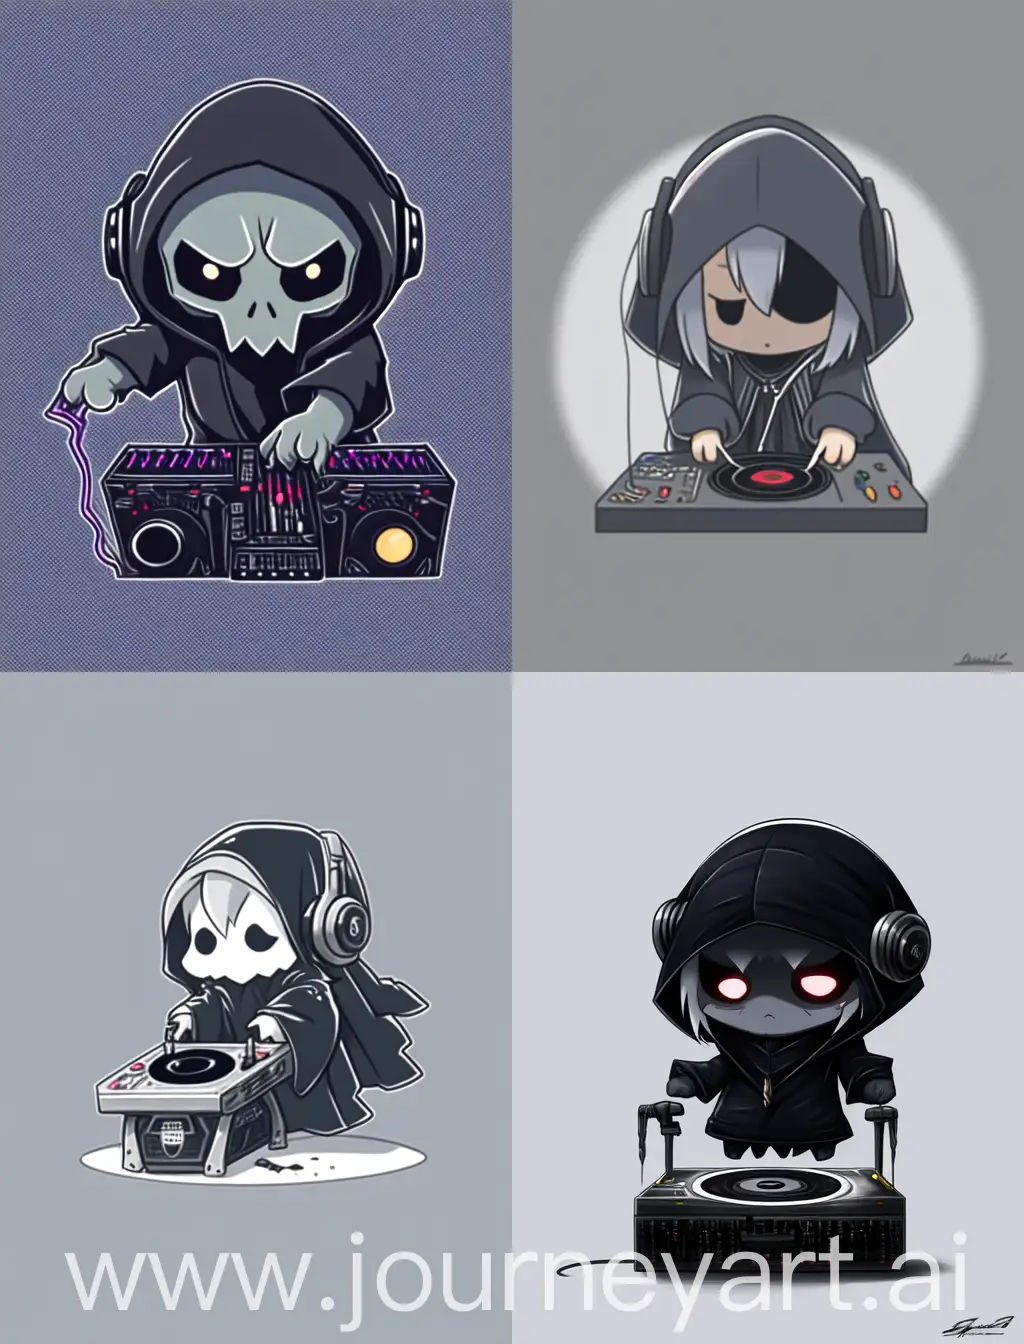 sad chibi anime grim reaper playing dj, cartoon anime style, with strong lines, with grey solid background